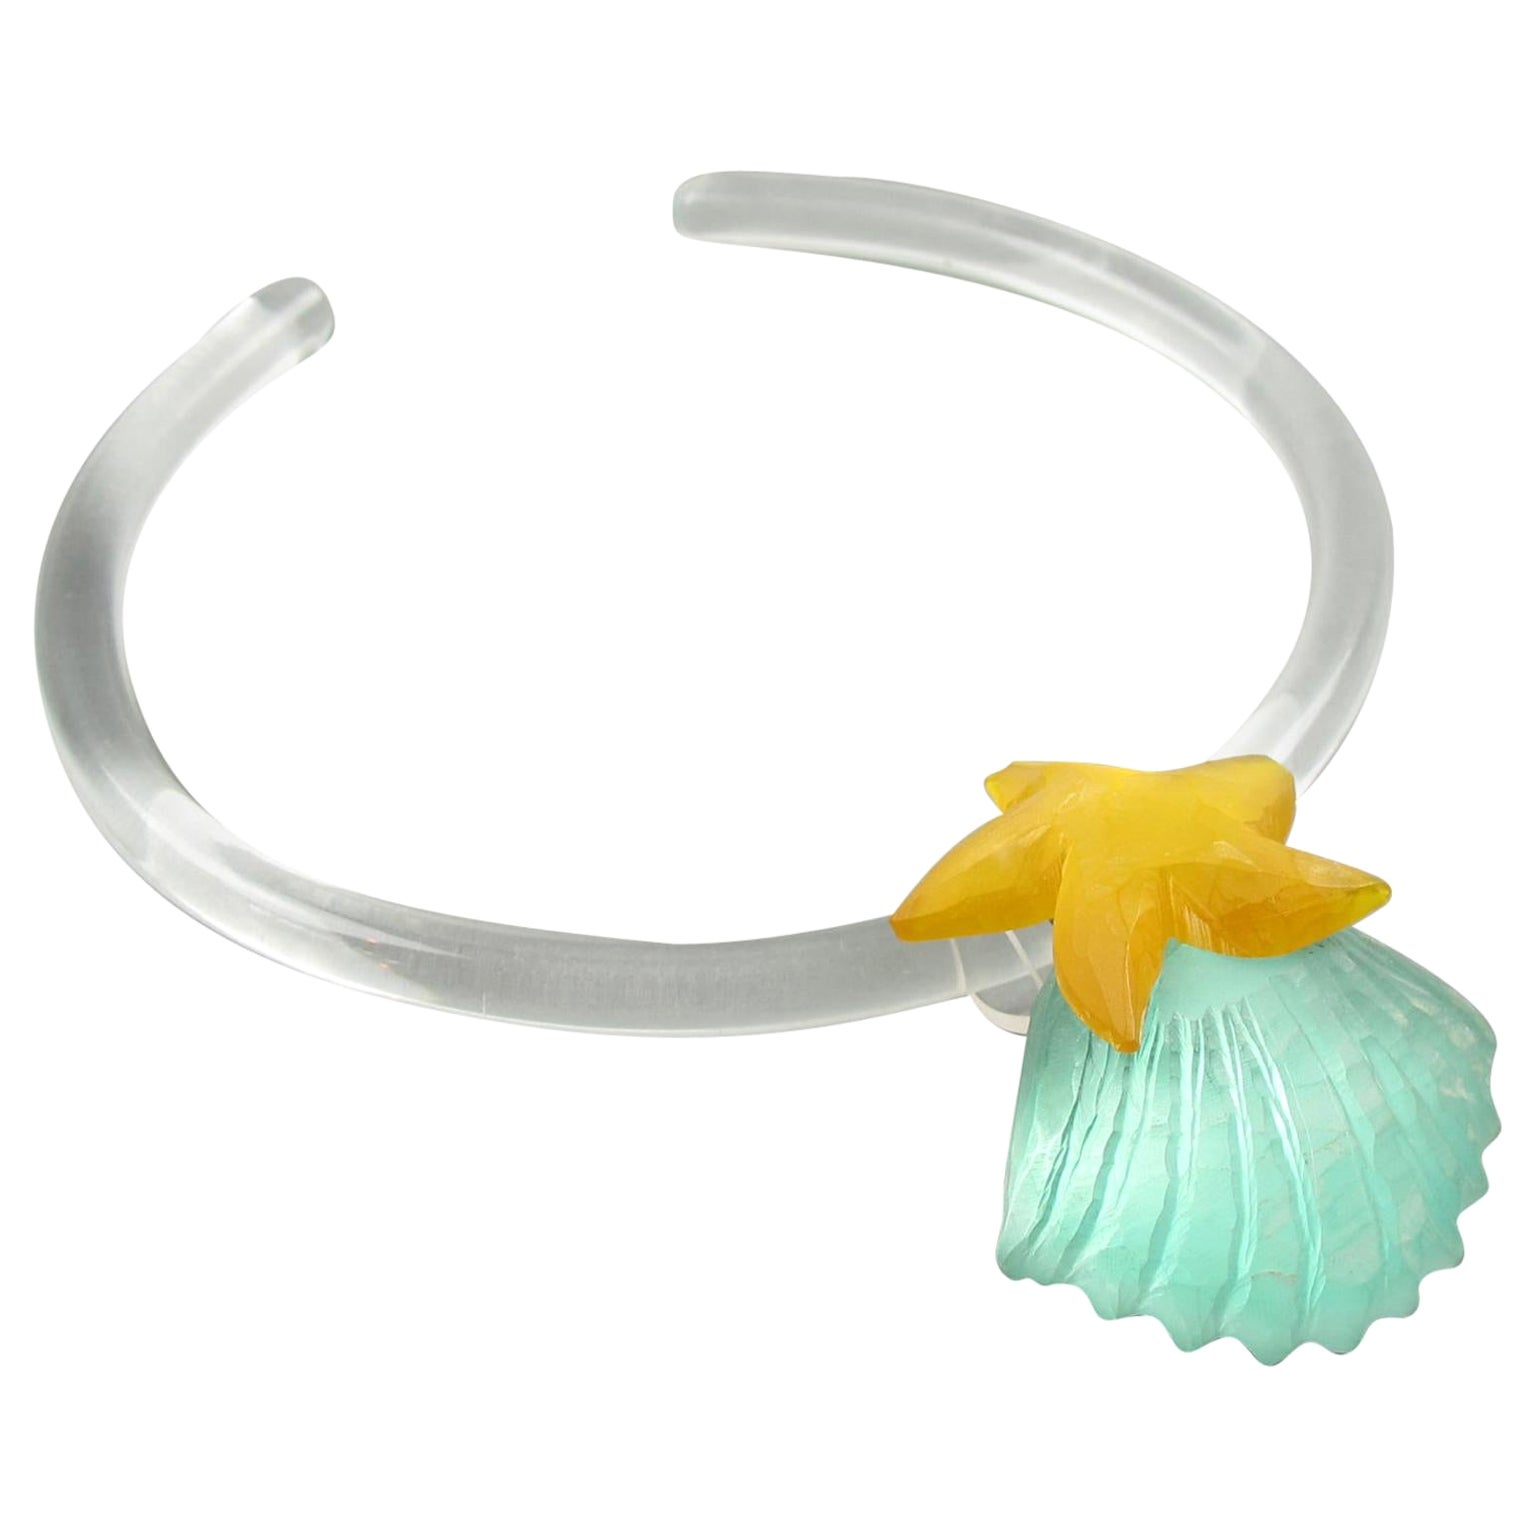 Kaso Rigid Lucite Choker Necklace Green Yellow Shell and Starfish